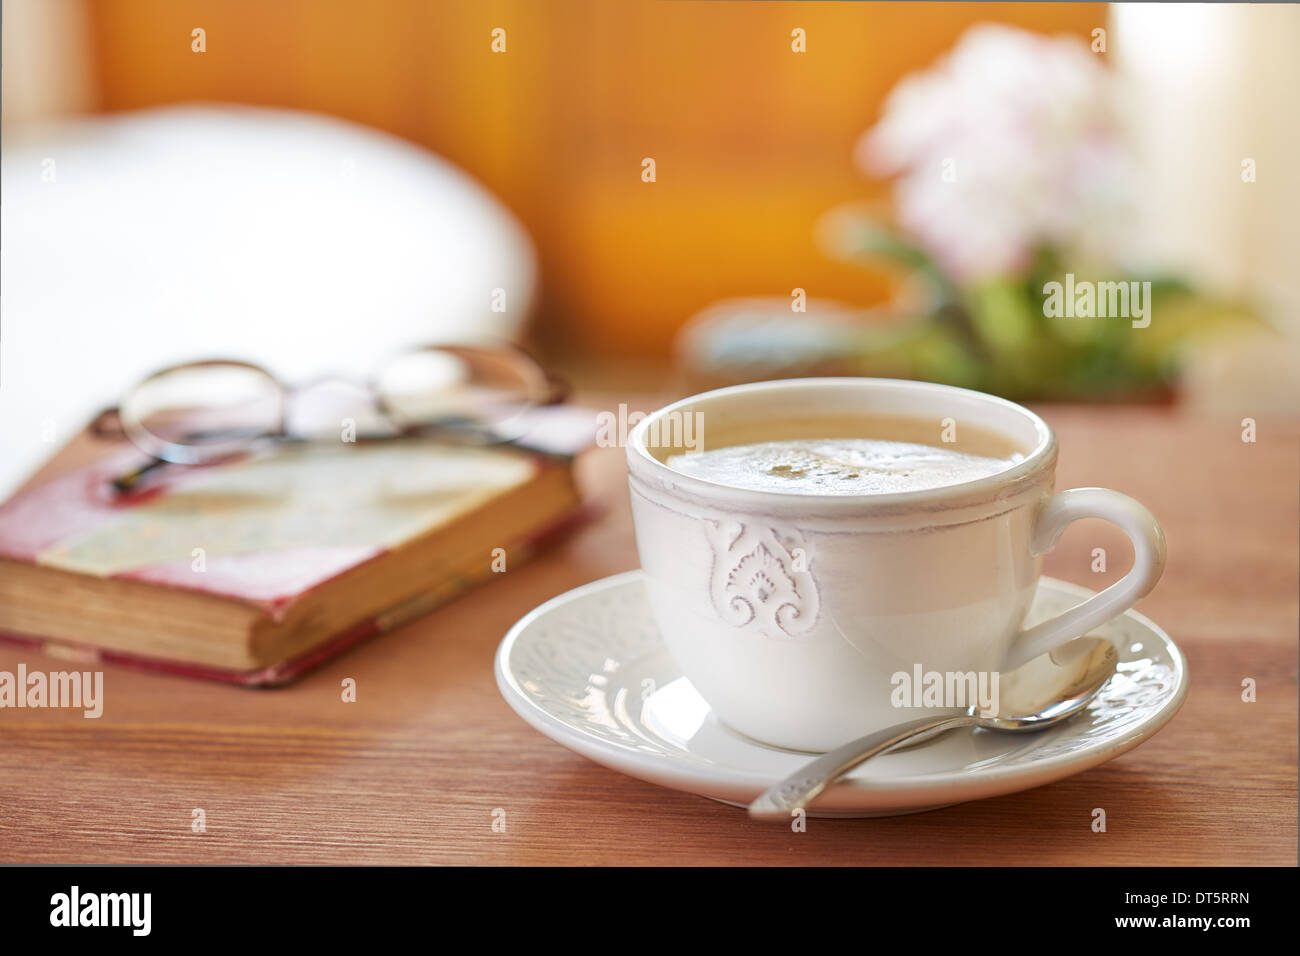 Coffee latte still life with glasses and book Stock Photo